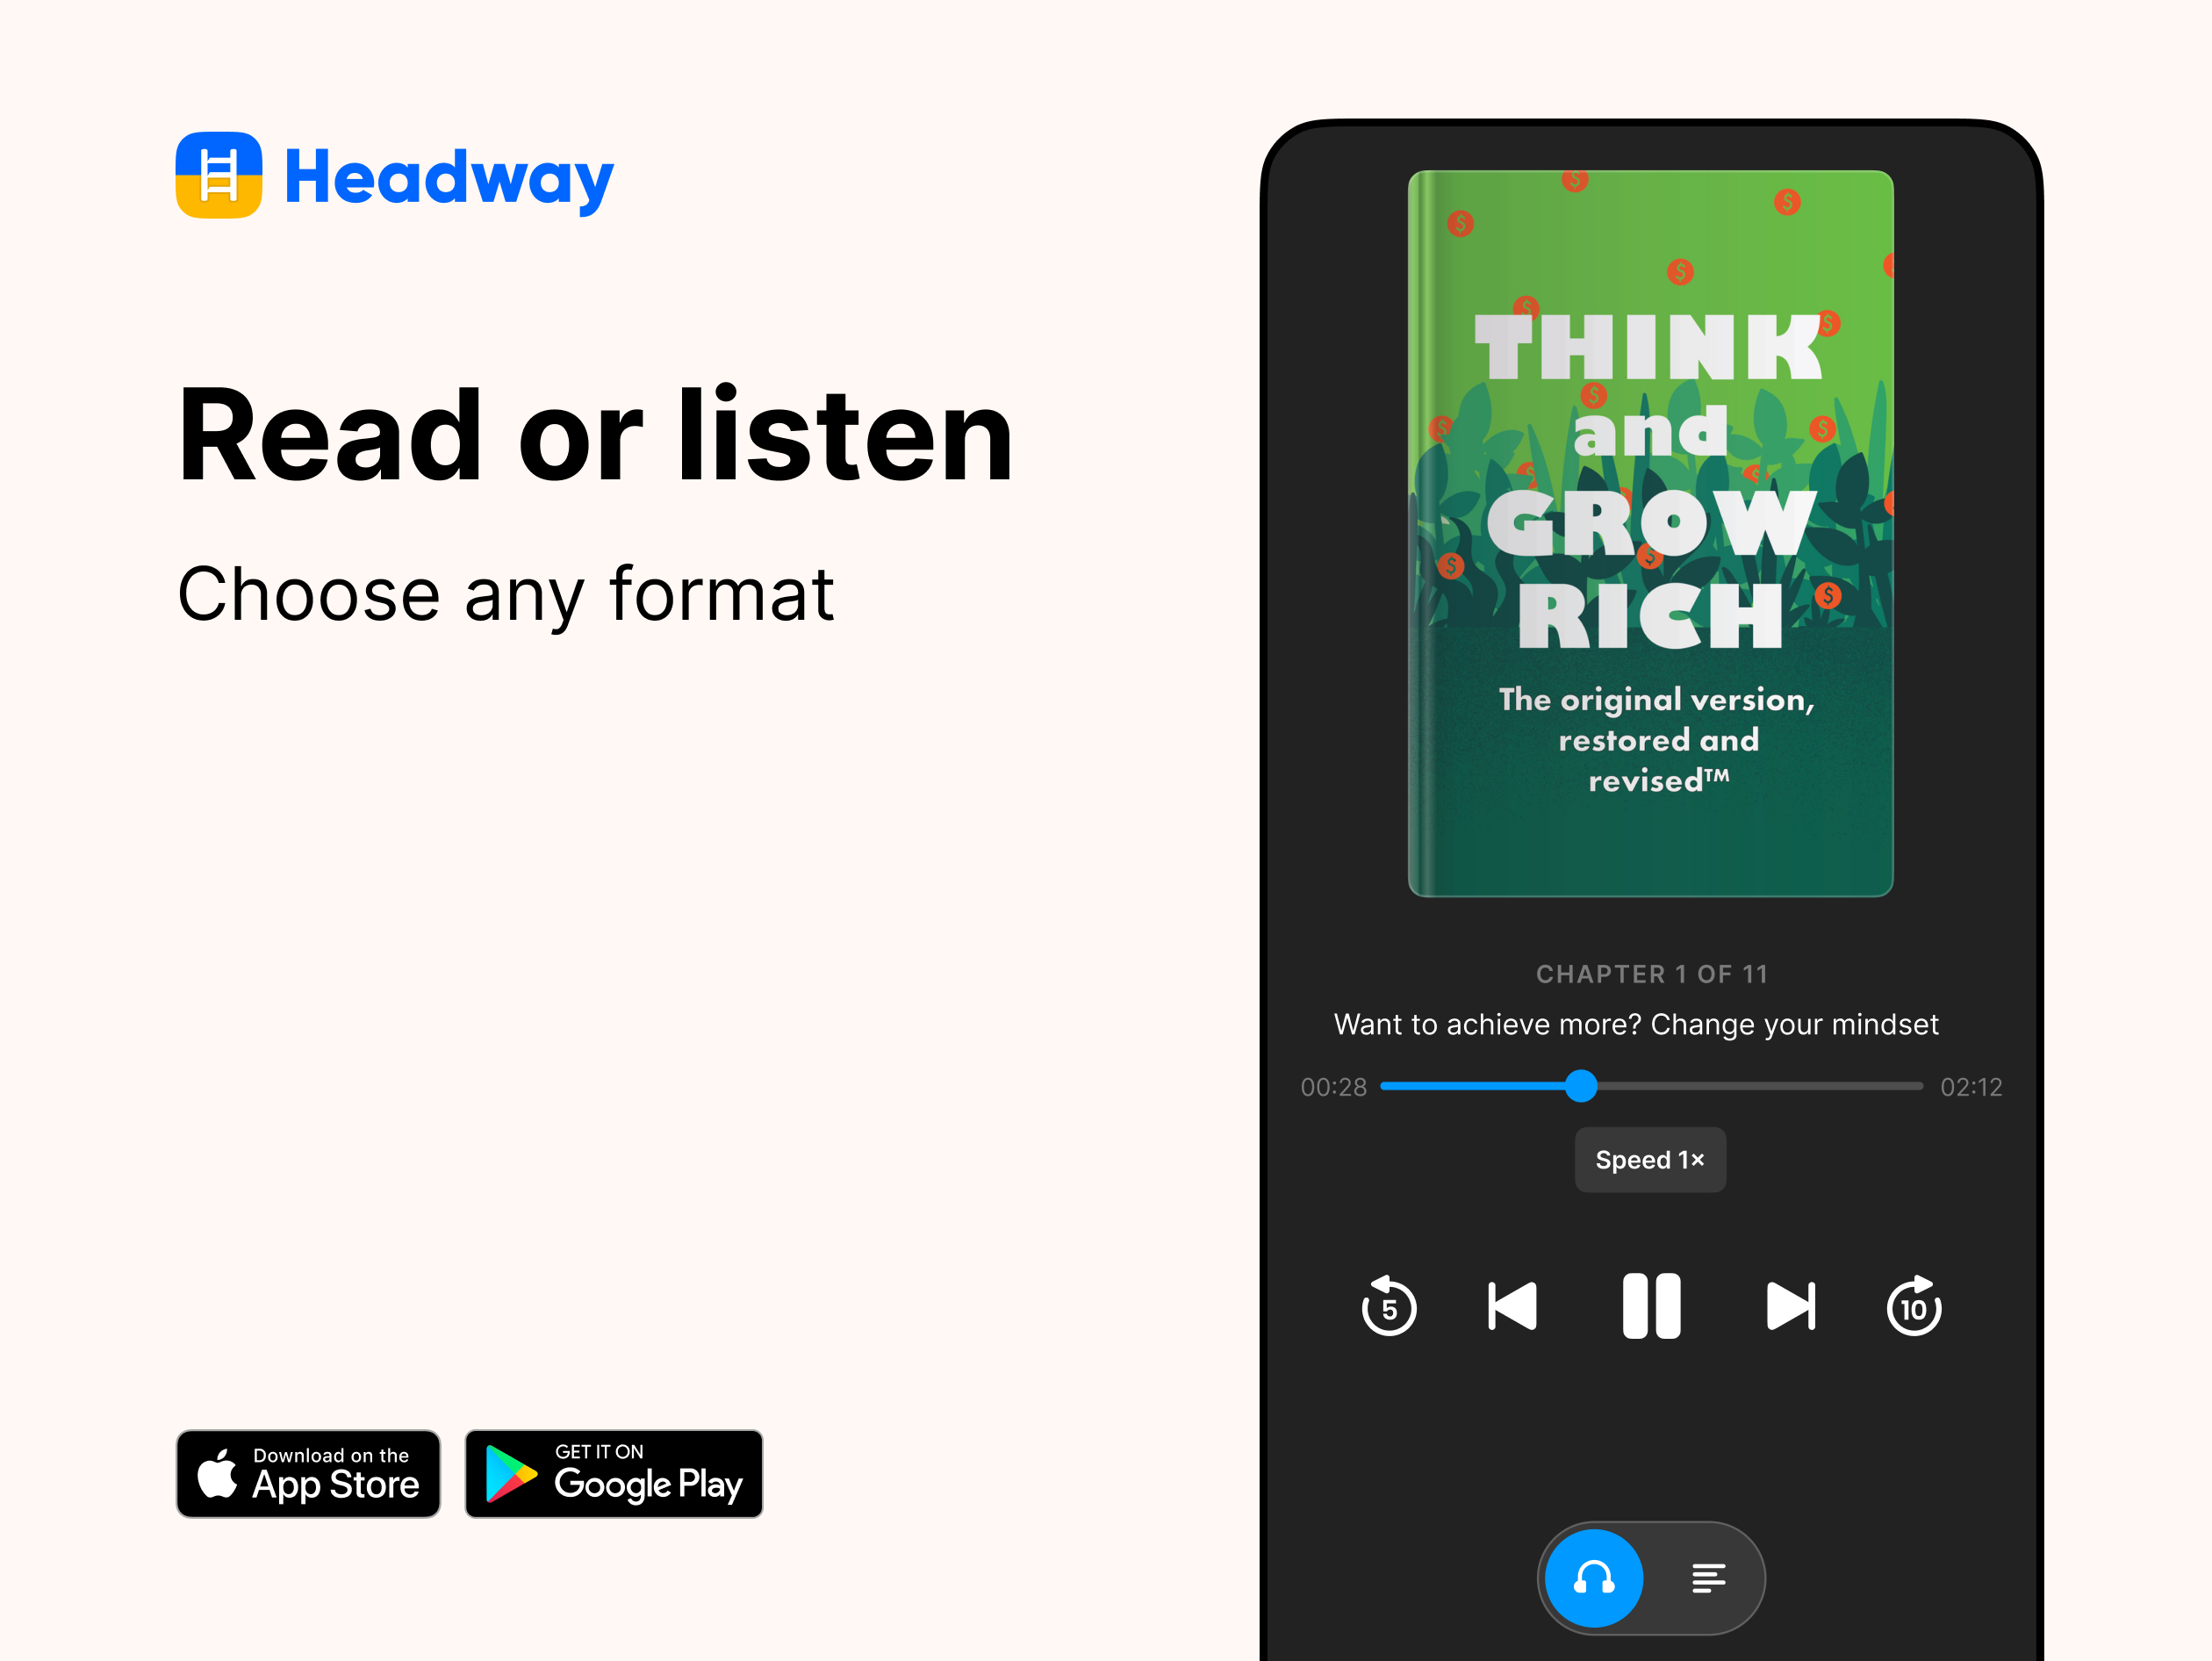 Choose any format, you can read or listen